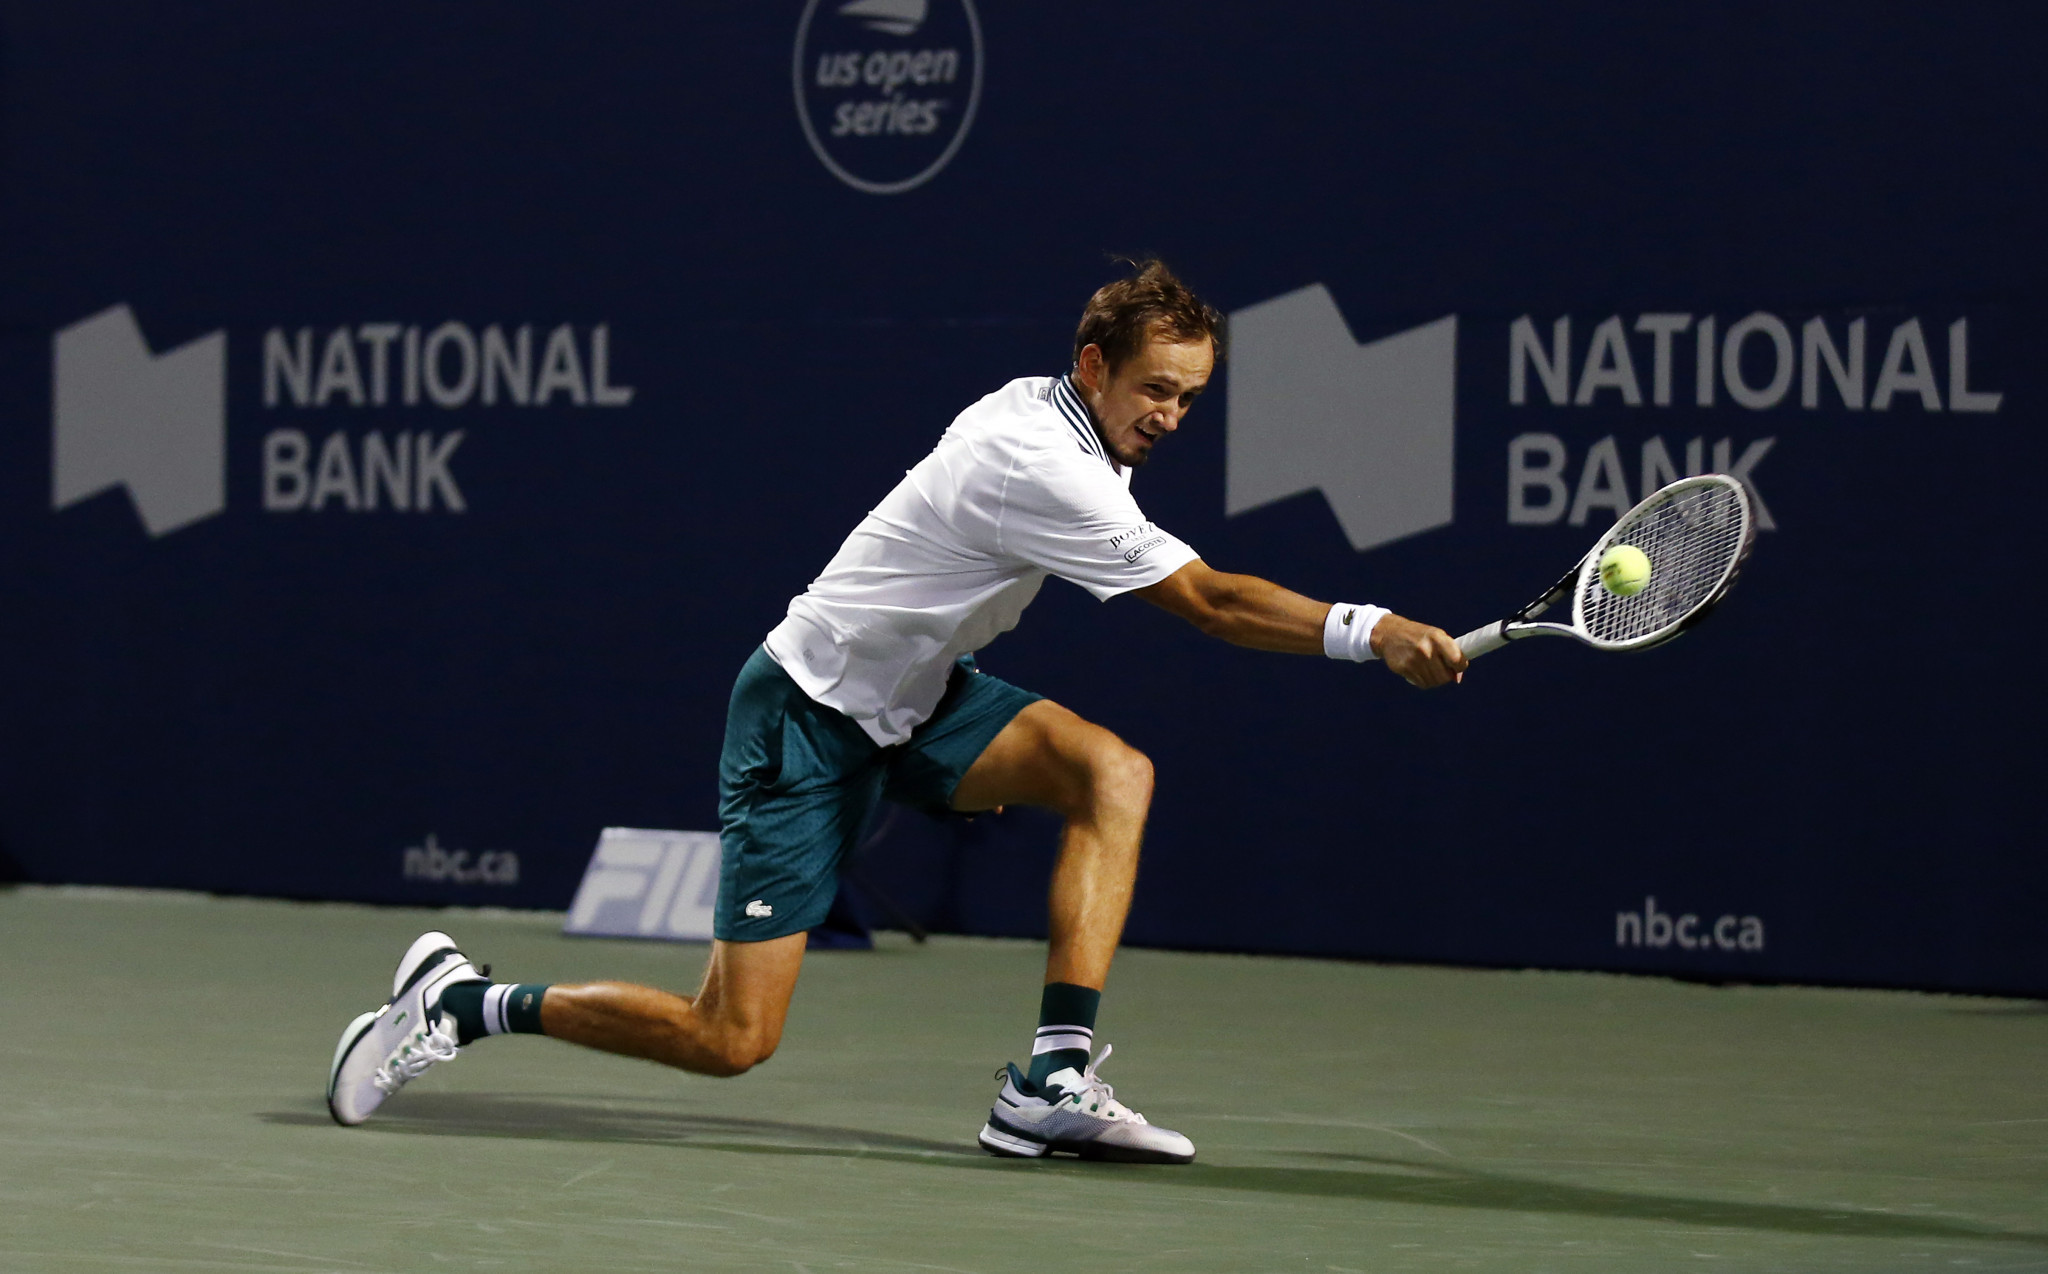 Daniil Medvedev is chasing his fourth ATP Masters 1000 title ©Getty Images